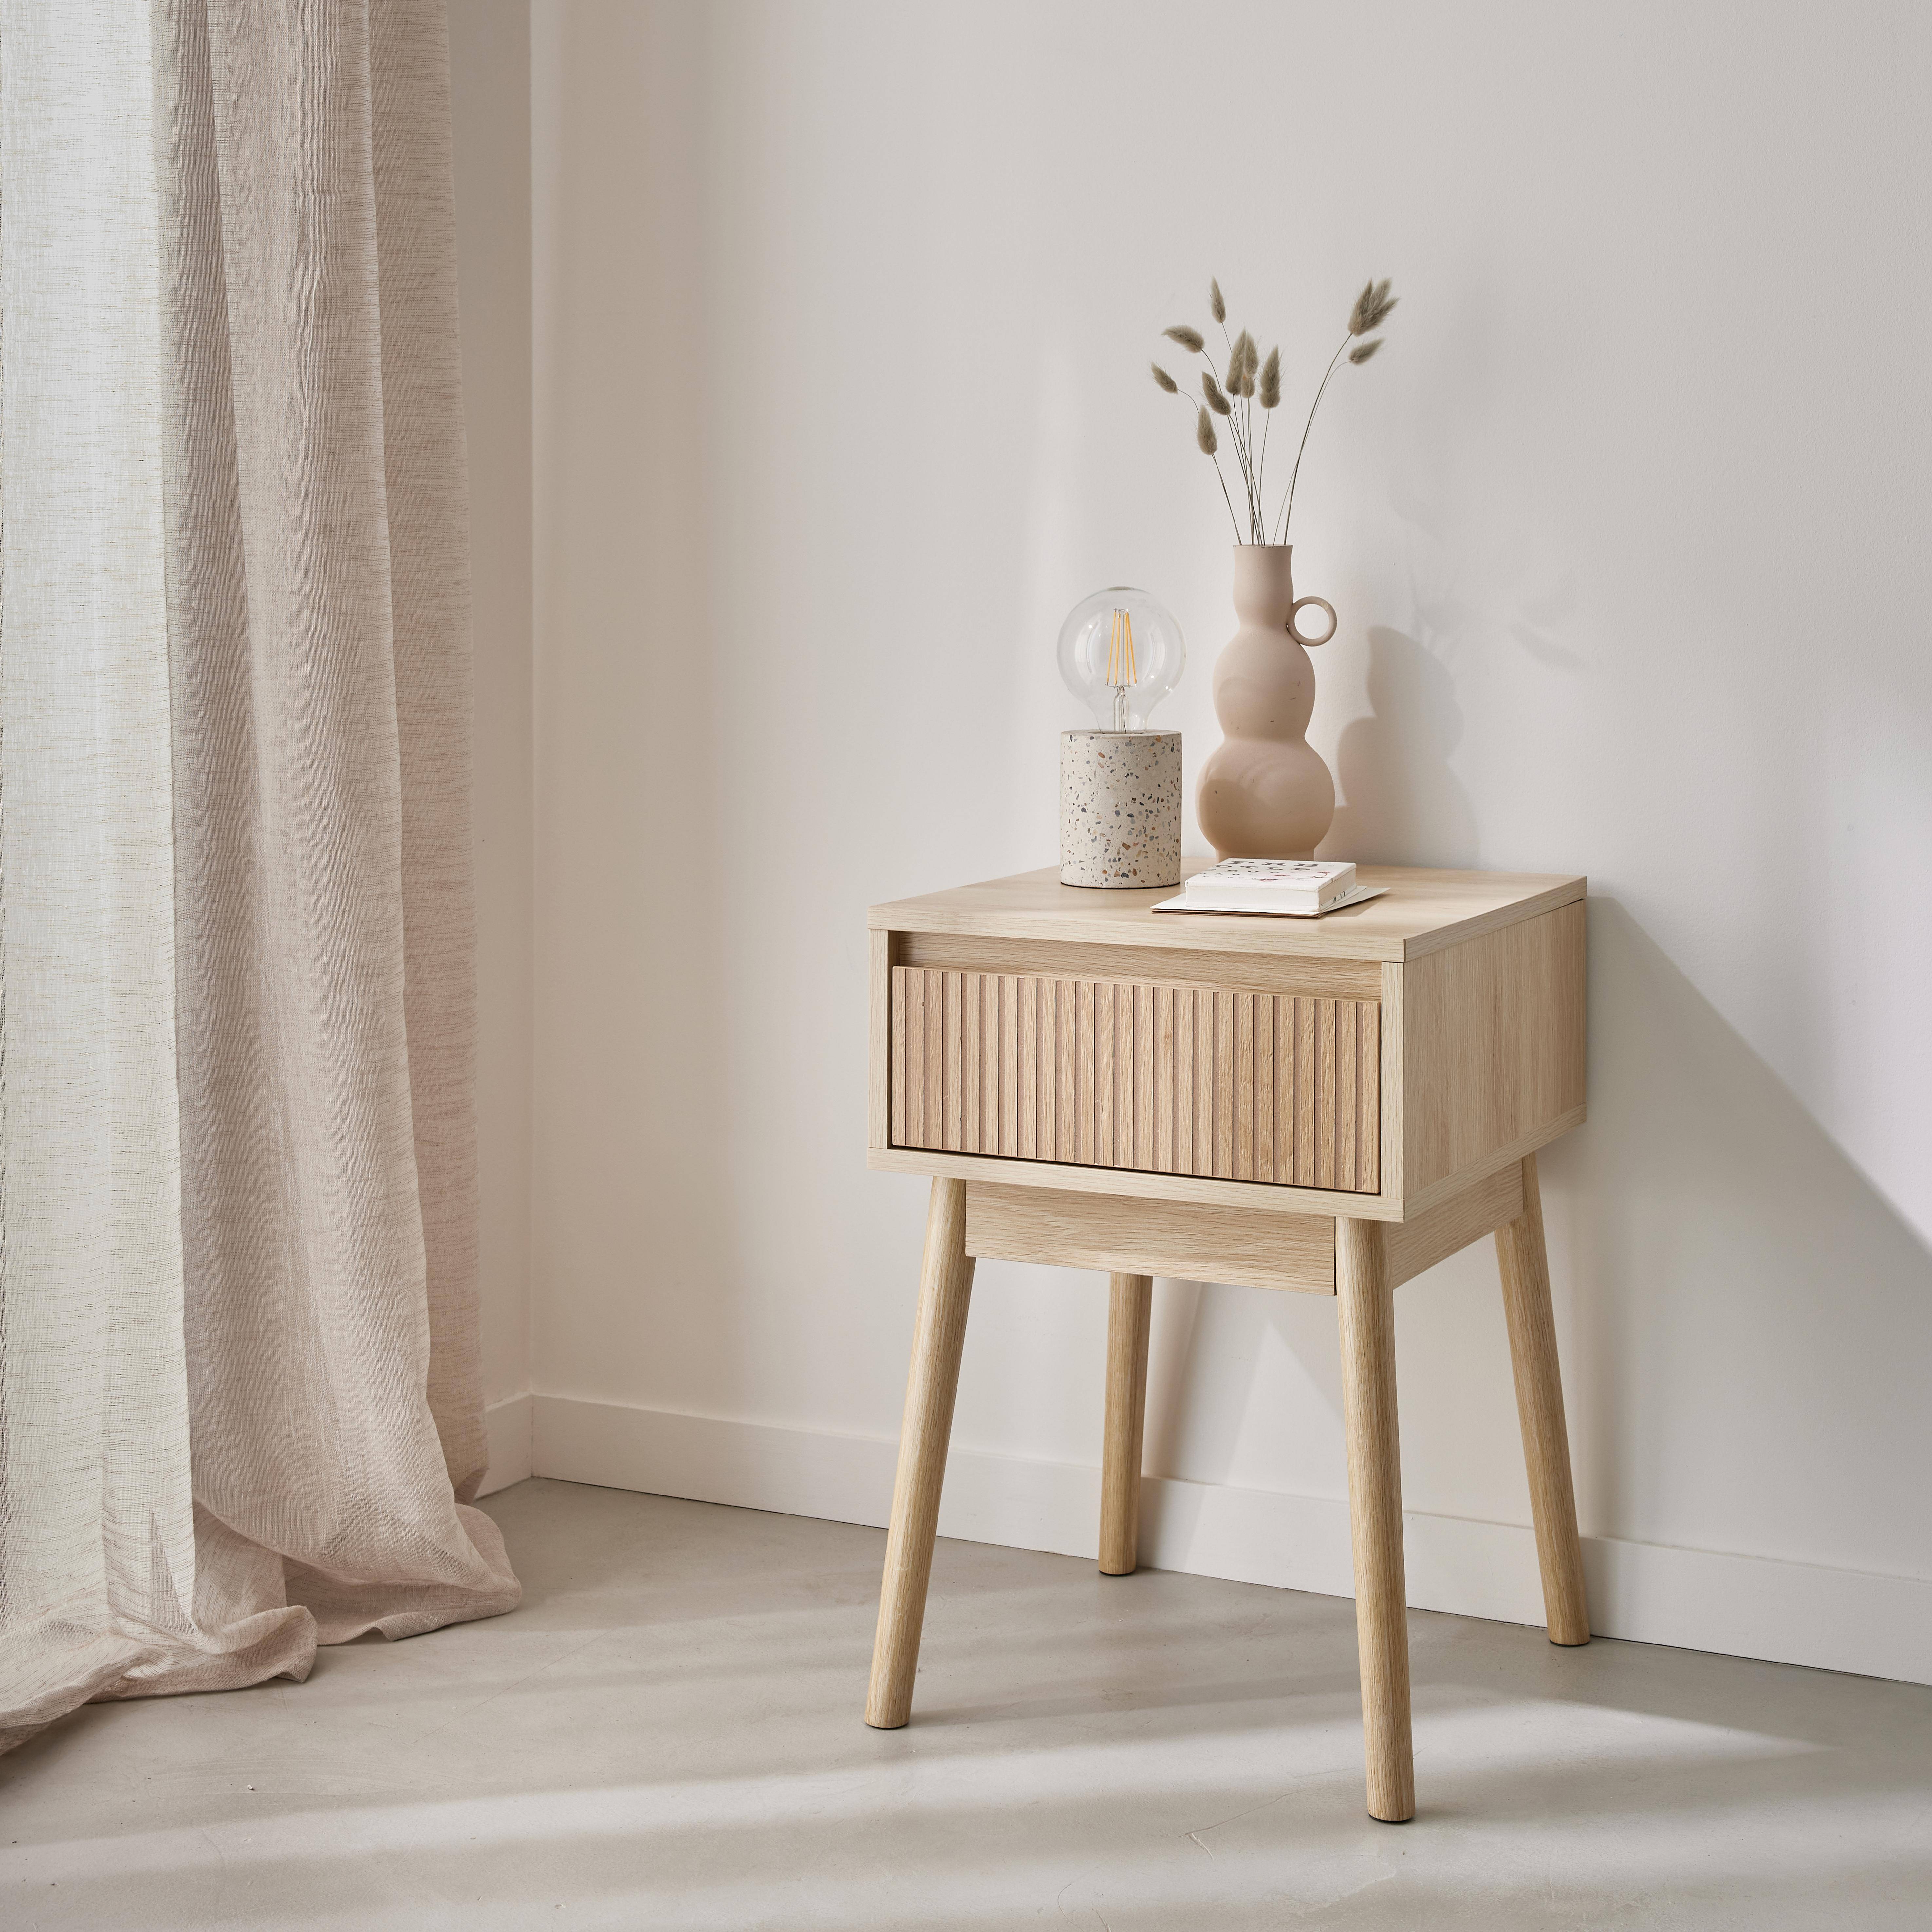 Bedside table with one drawer. Natural colour laminate panels. Fir wood legs.  W 39 x 39 x H 55.4cm LINEAR,sweeek,Photo2